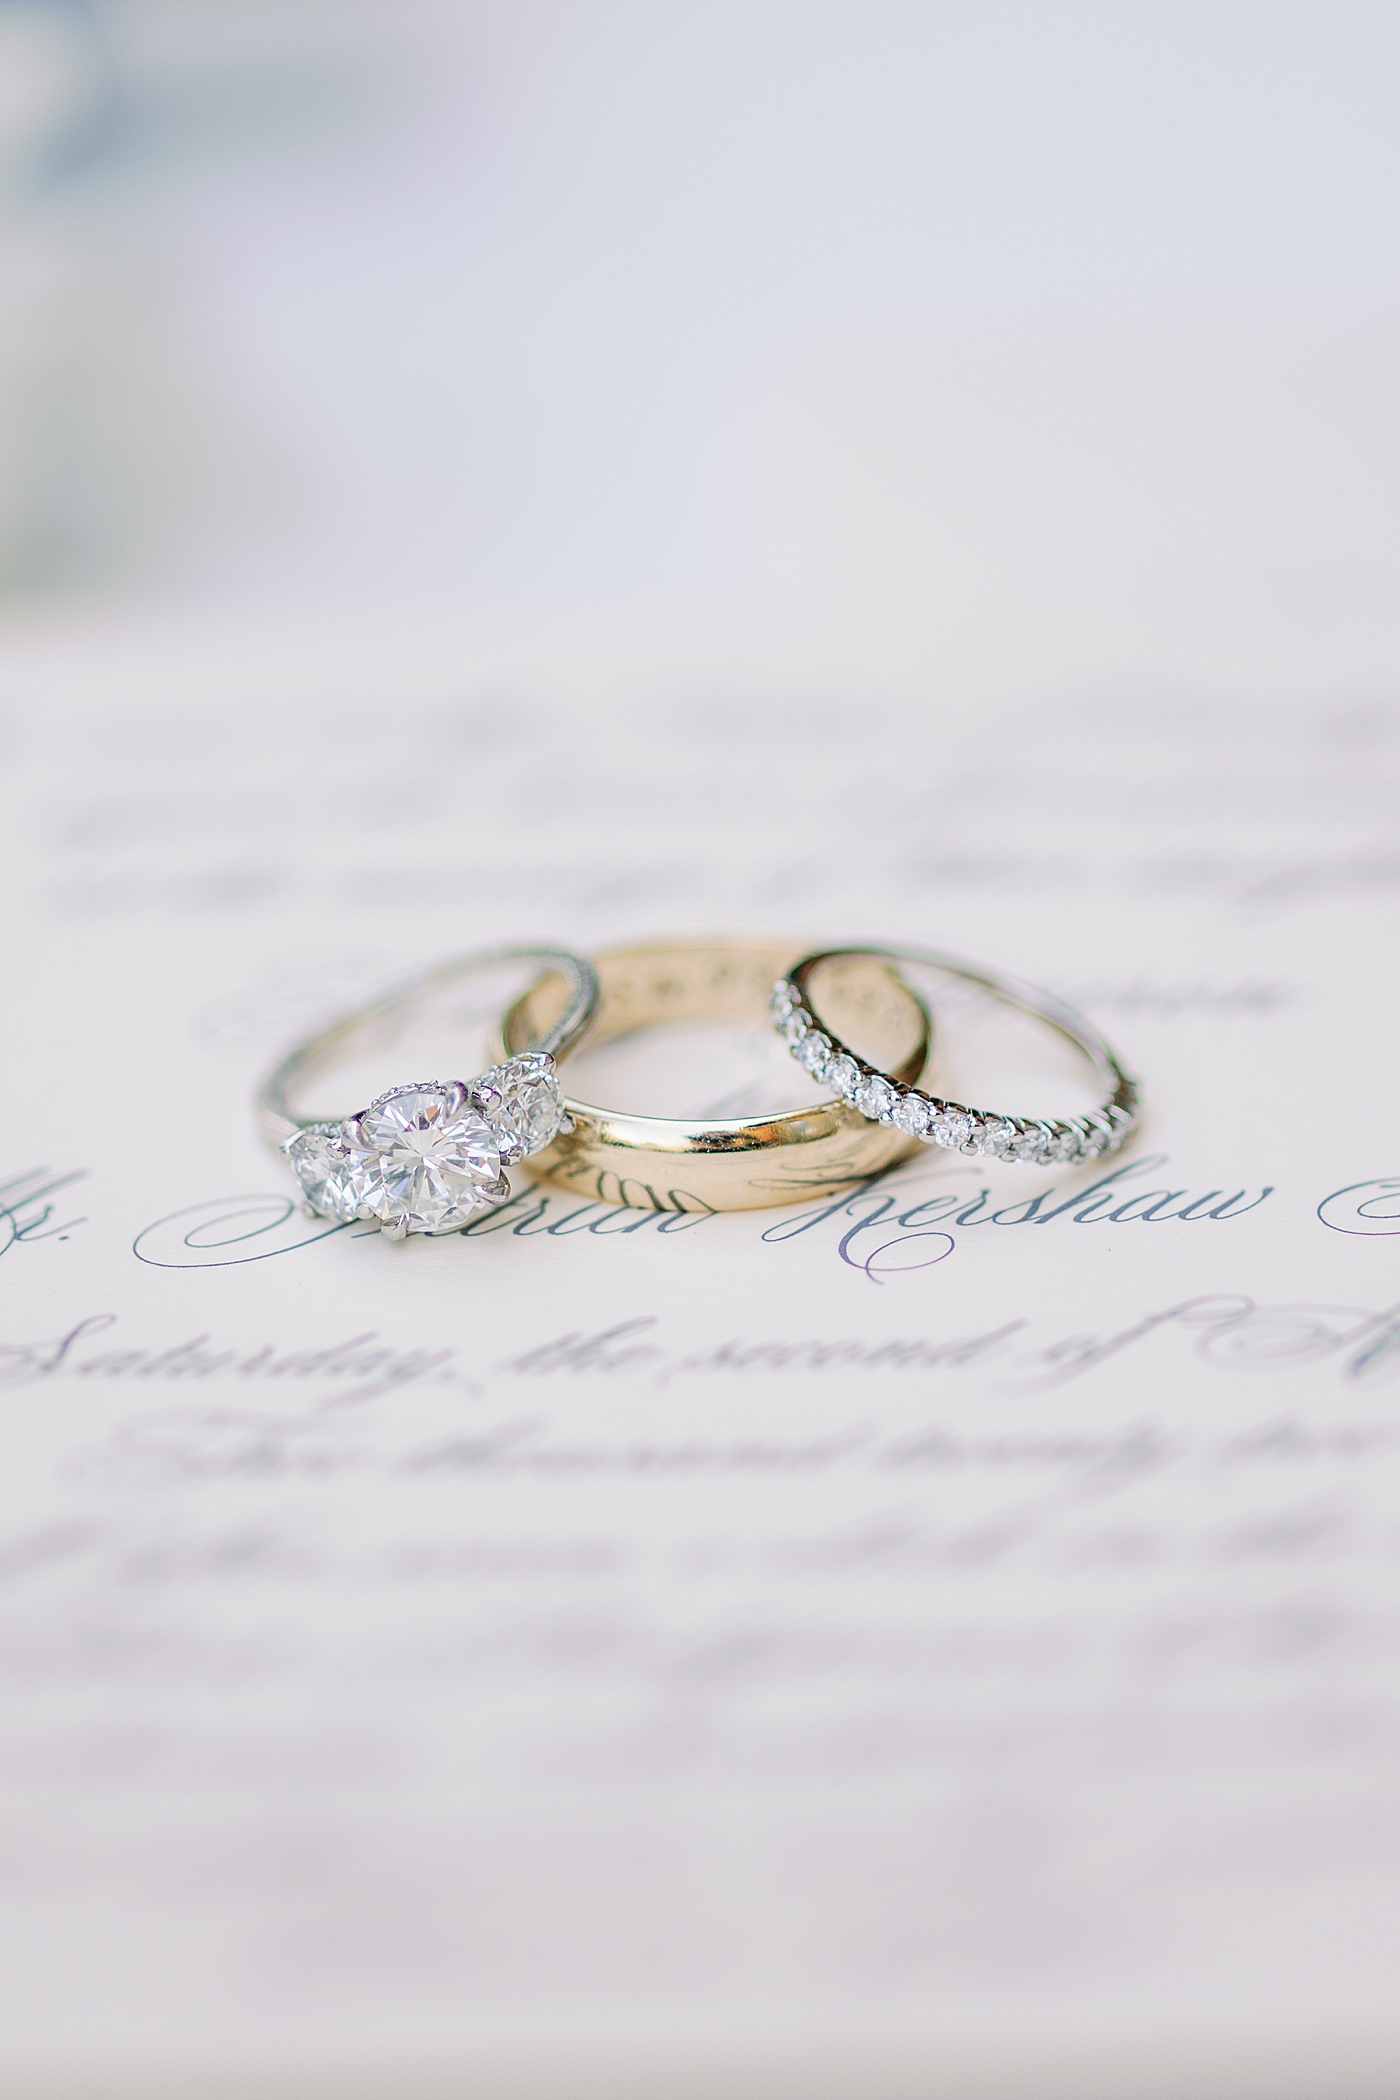 Wedding rings styled on an invitation suite | Photo by Annie Laura Photography